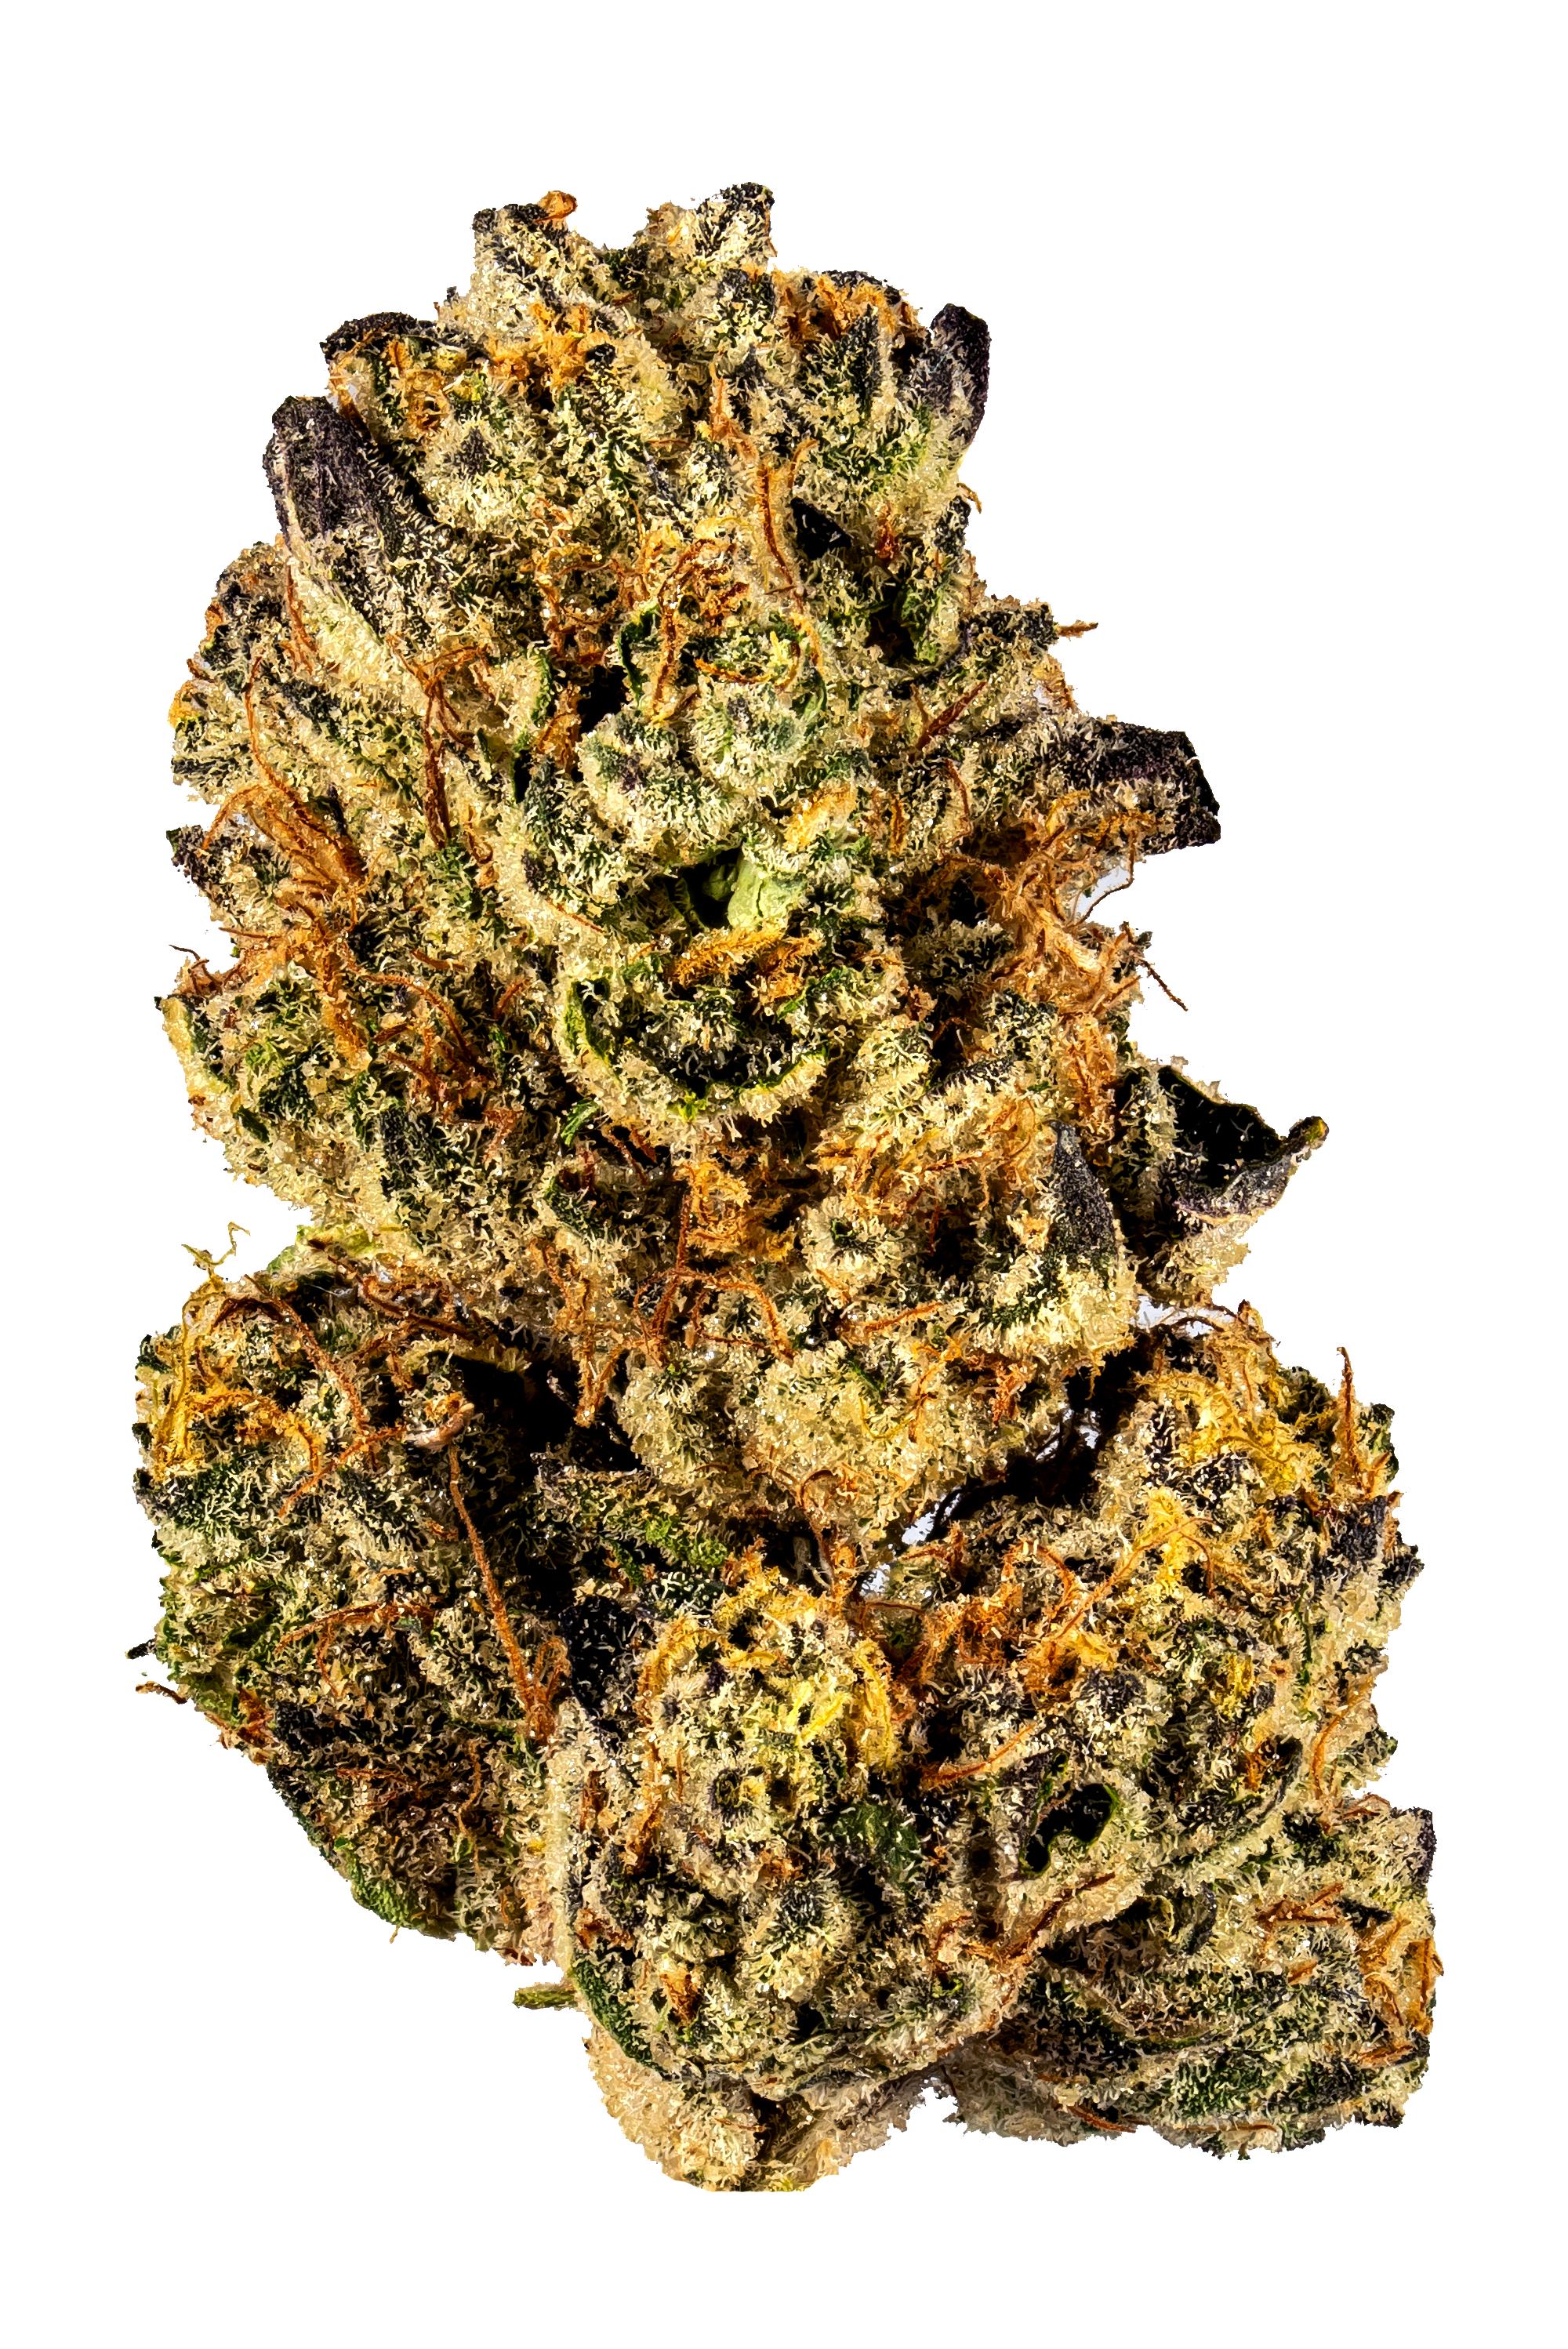 Wedding Cake Strain | Buy Weed Online at Herb Approach | Cannabis